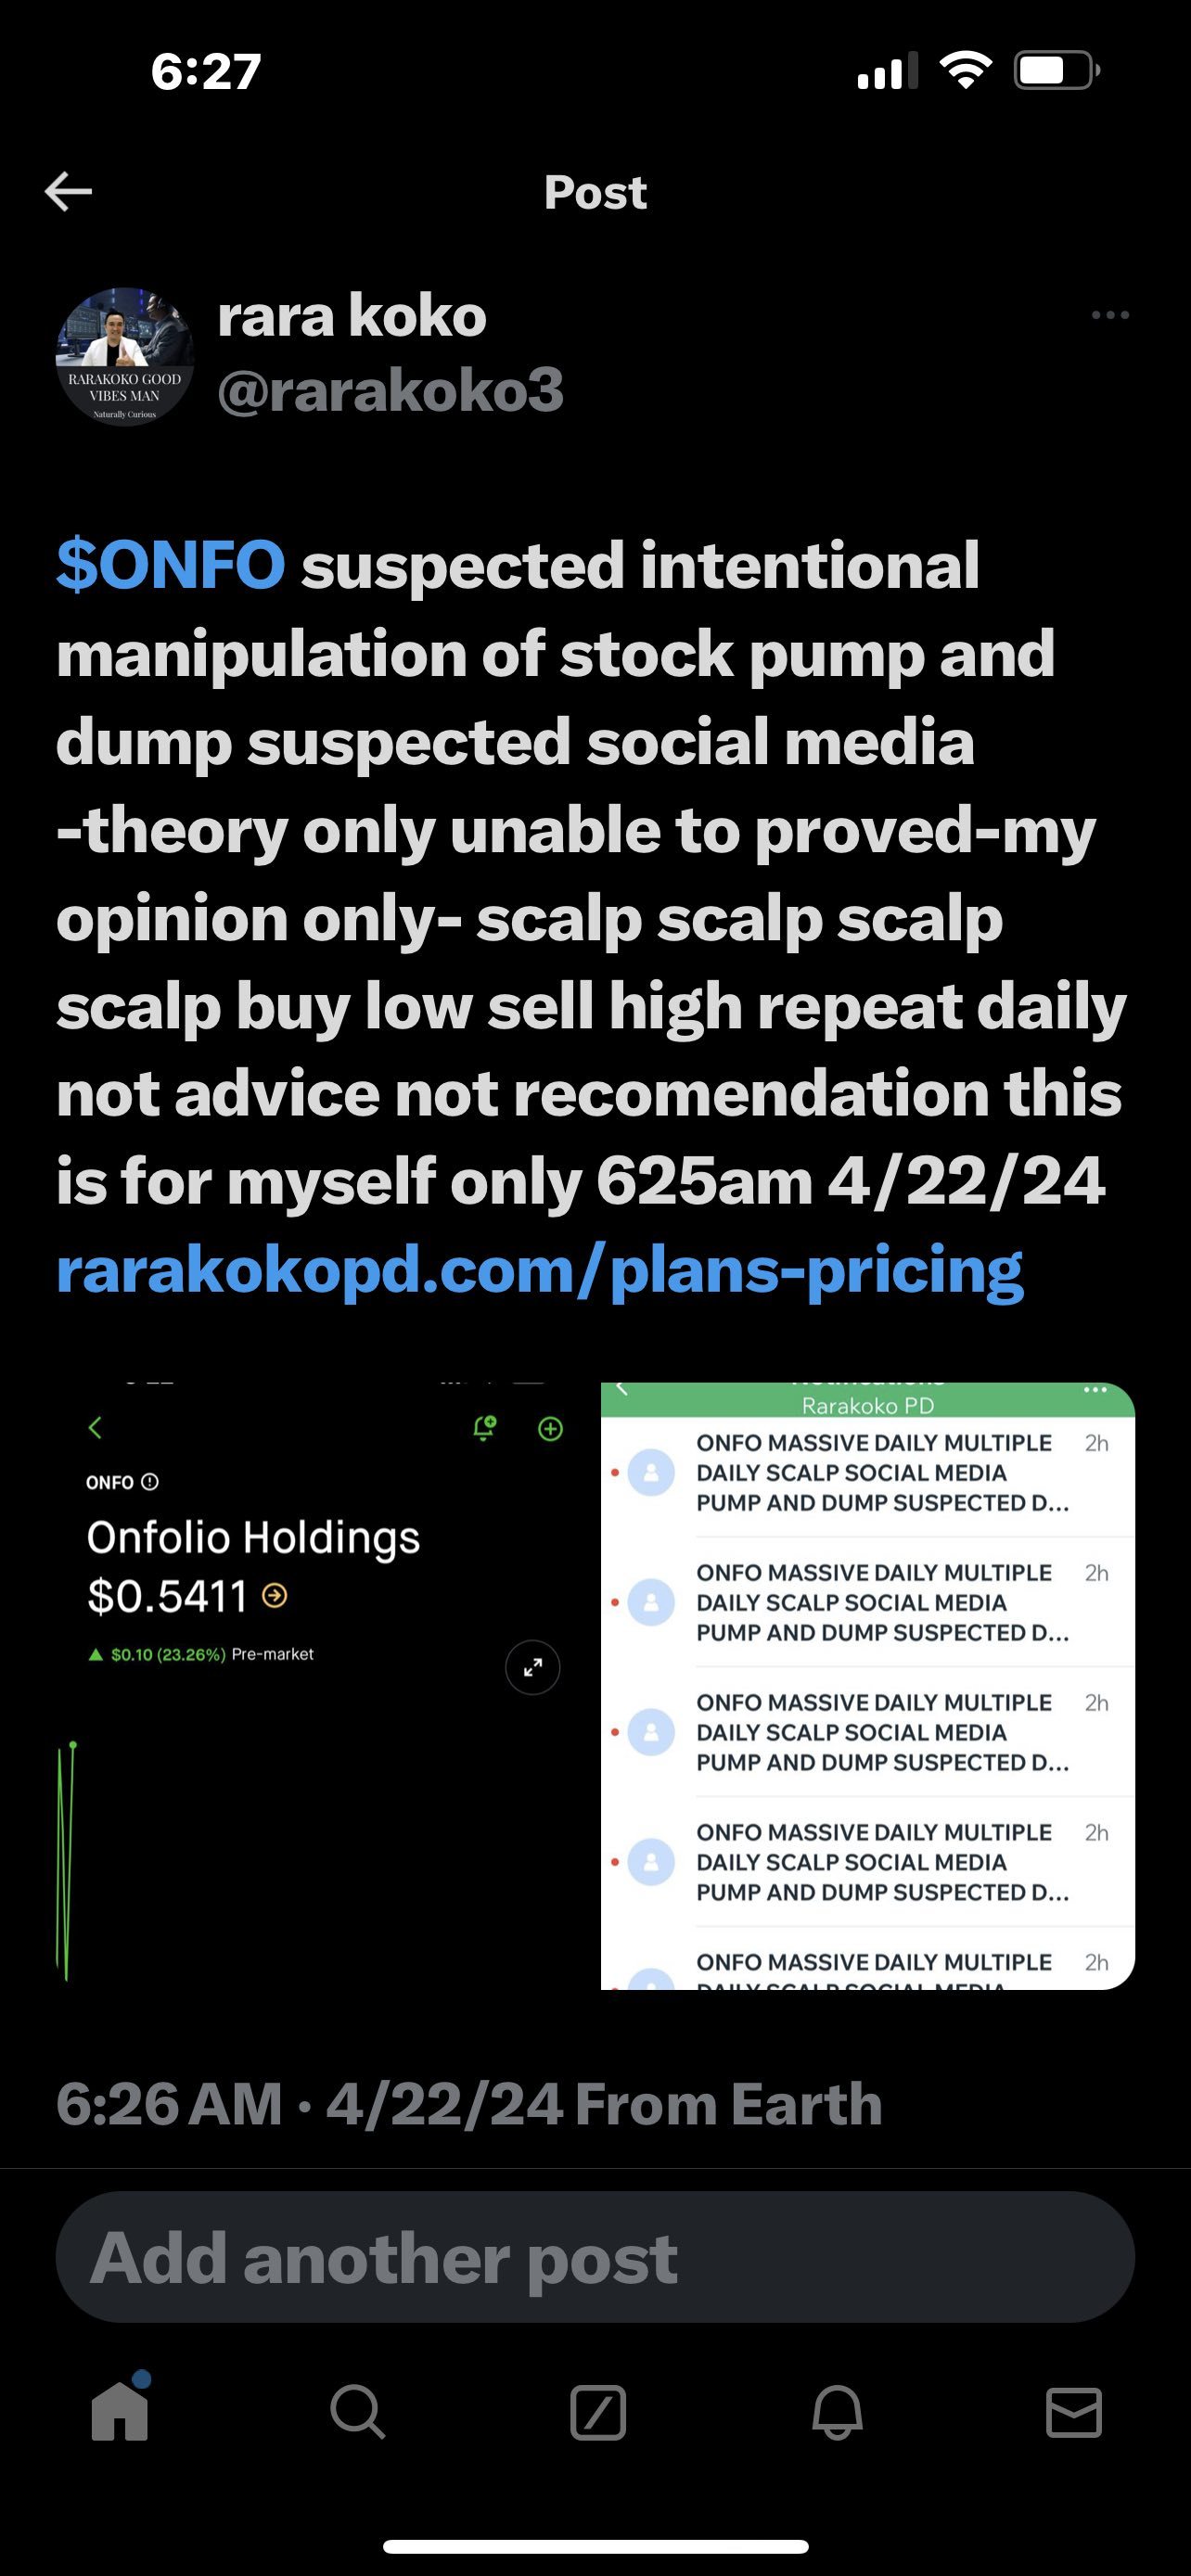 $ONFO suspected intentional manipulation of stock pump and dump suspected social media -theory only unable to proved-my opinion only- scalp scalp scalp scalp bu...